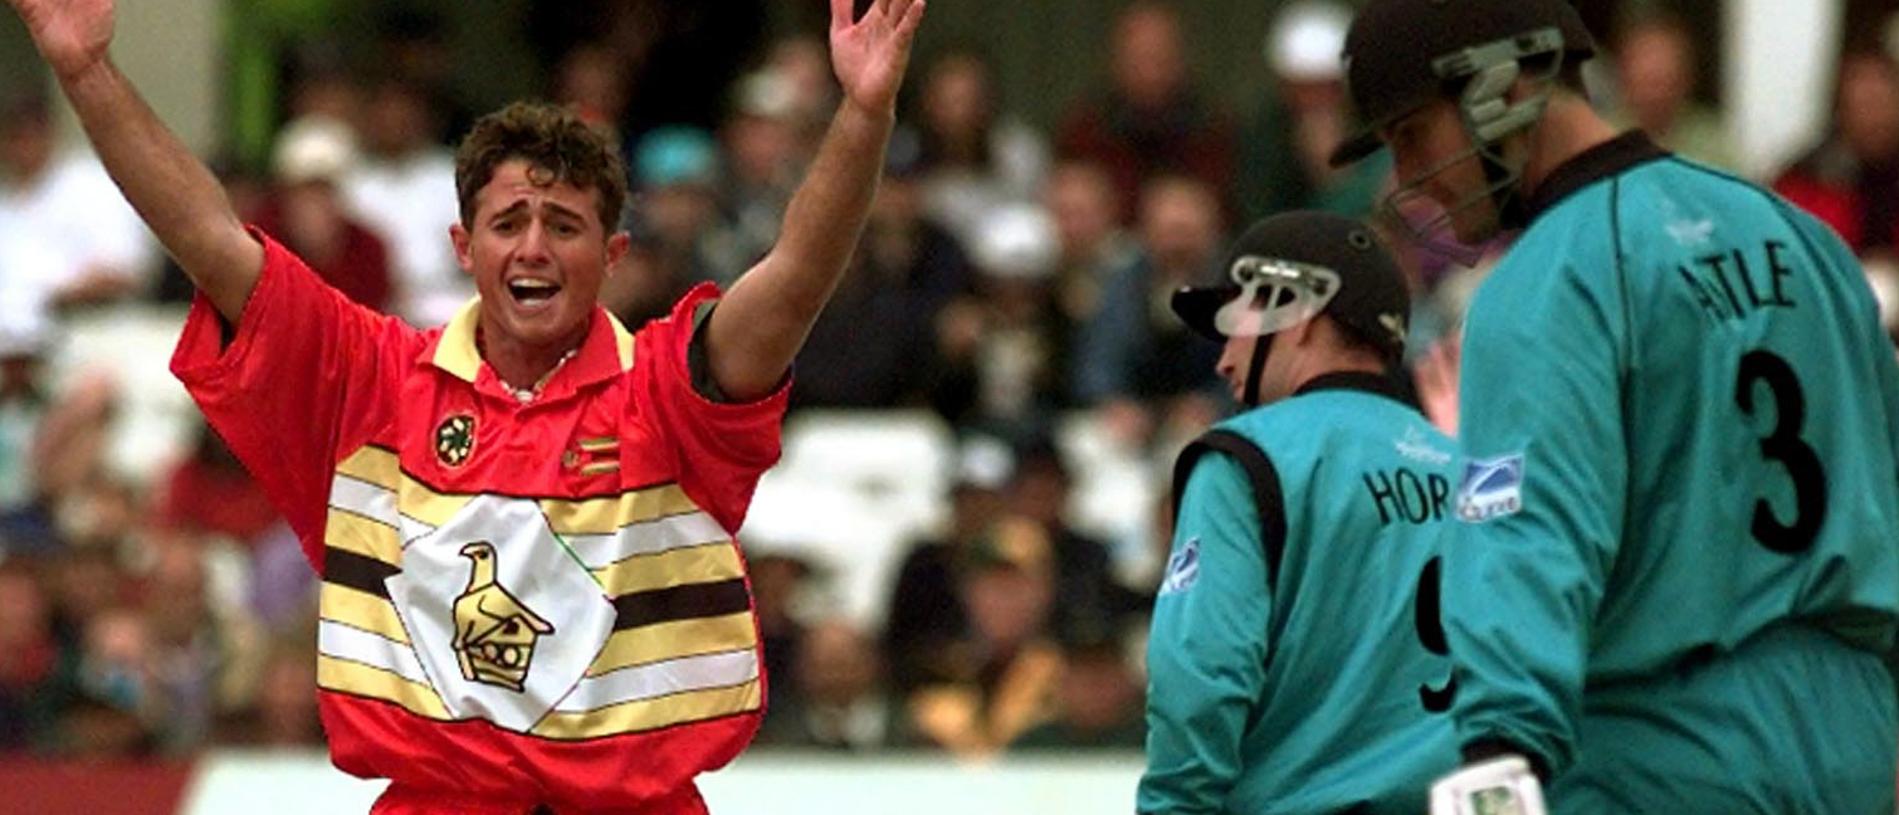 Cricketer Guy Whittall (l) with Matthew Horne (c).
Cricket - New Zealand vs Zimbabwe World Cup match in Leeds 06 Jun 1999. a/ct
/Cricket/World/Cup